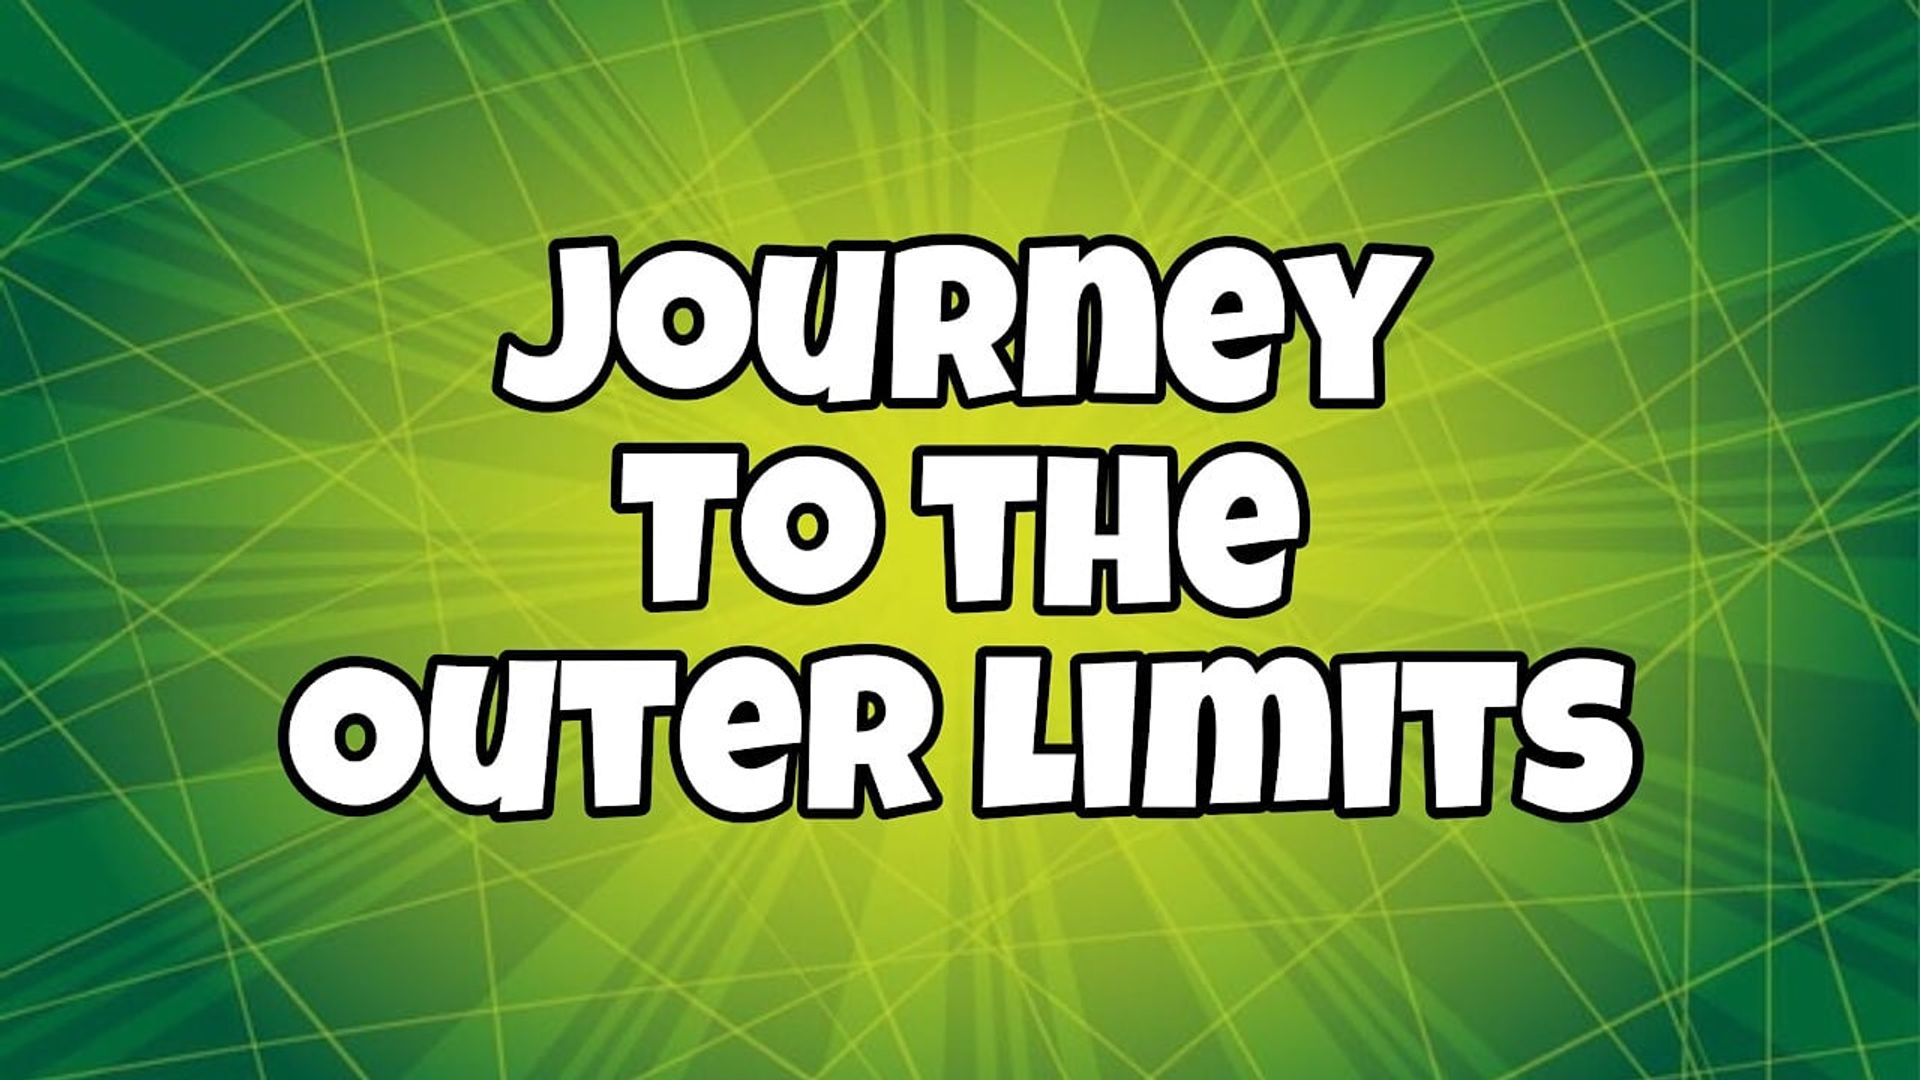 Journey to the Outer Limits background